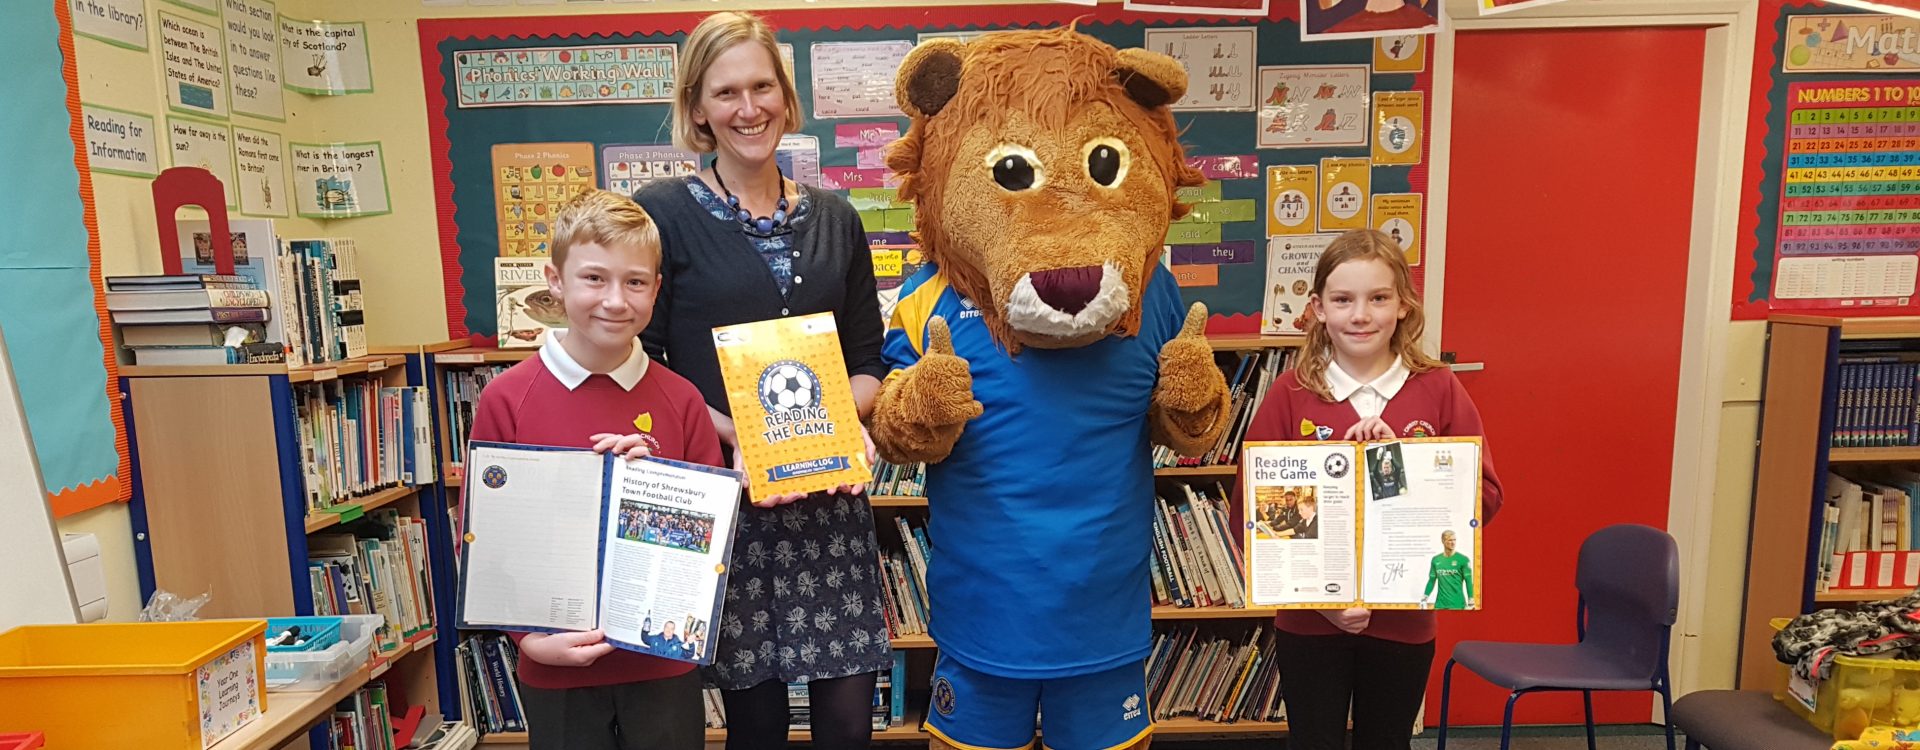 Lenny the Lion celebrates reading the game